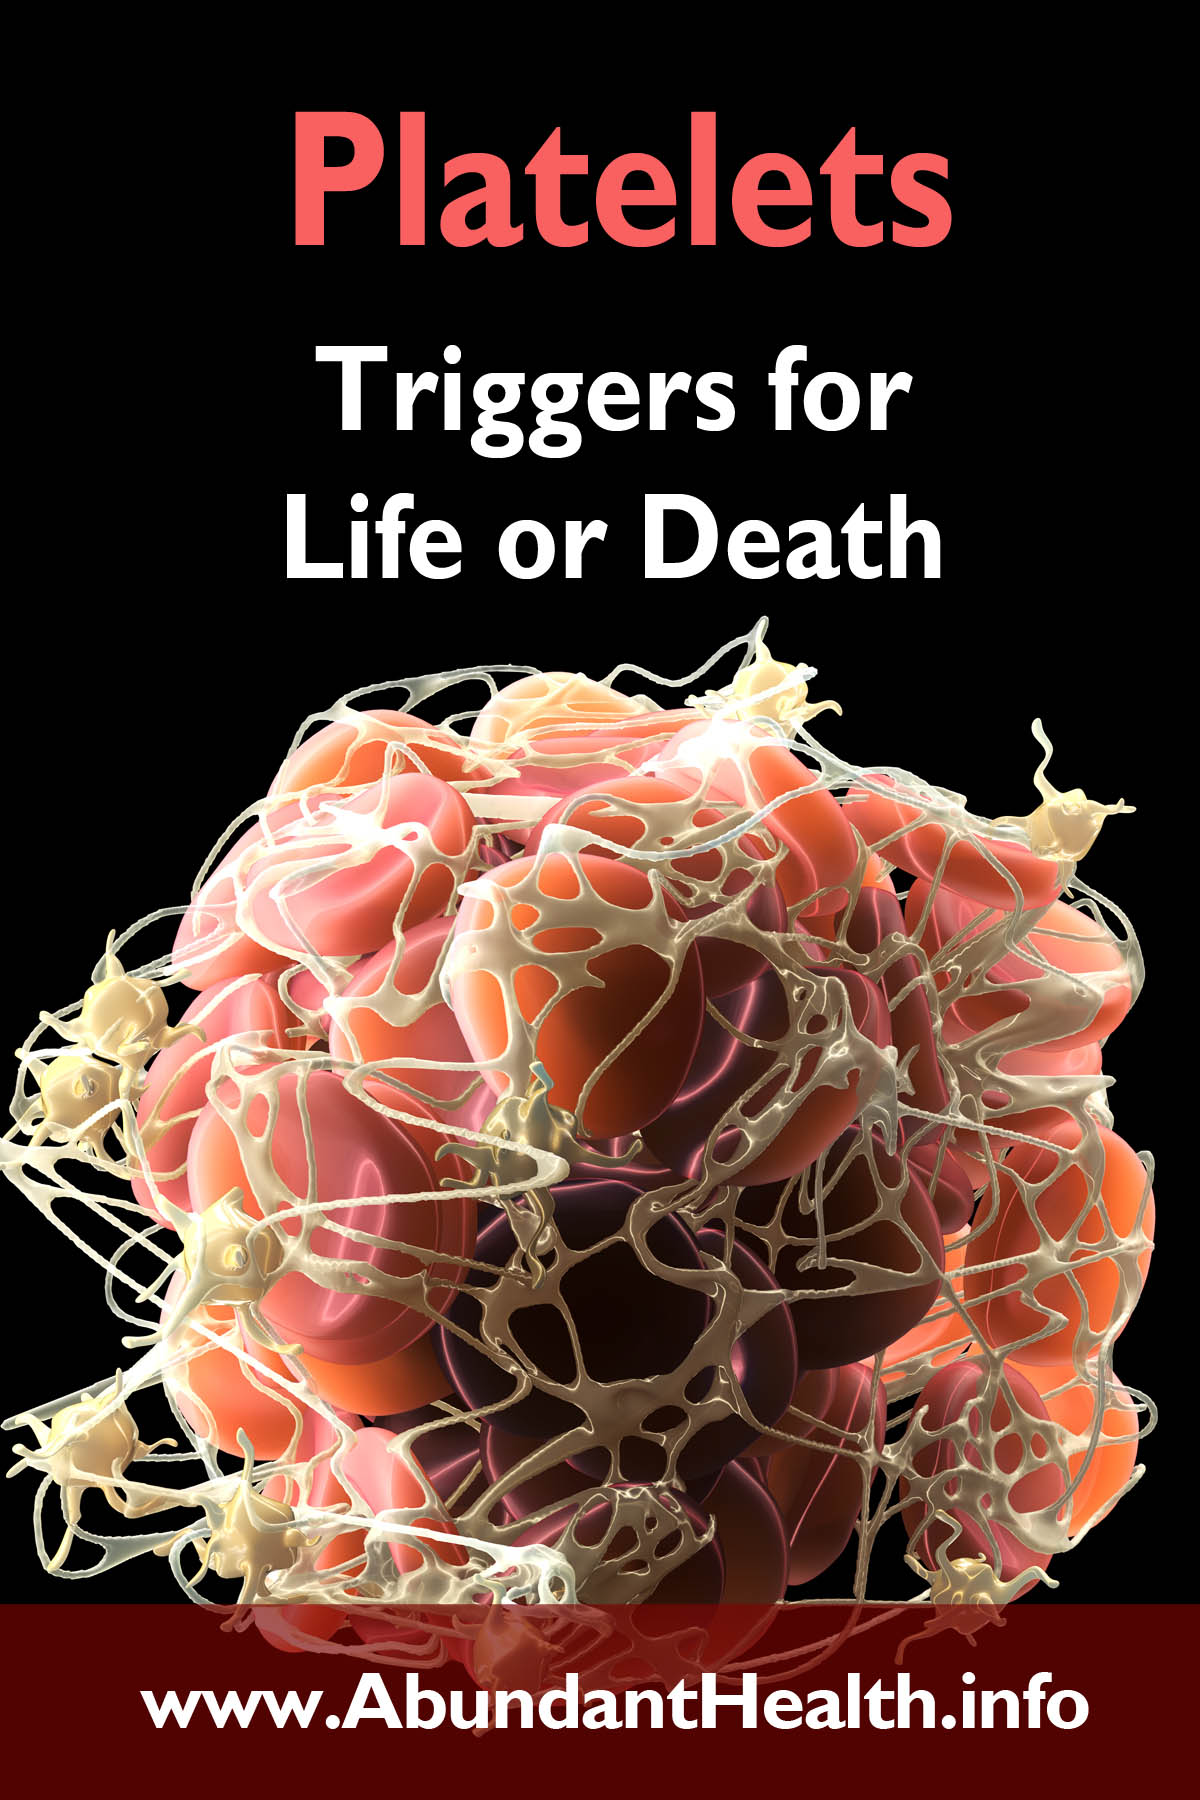 Platelets – Triggers for Life or Death